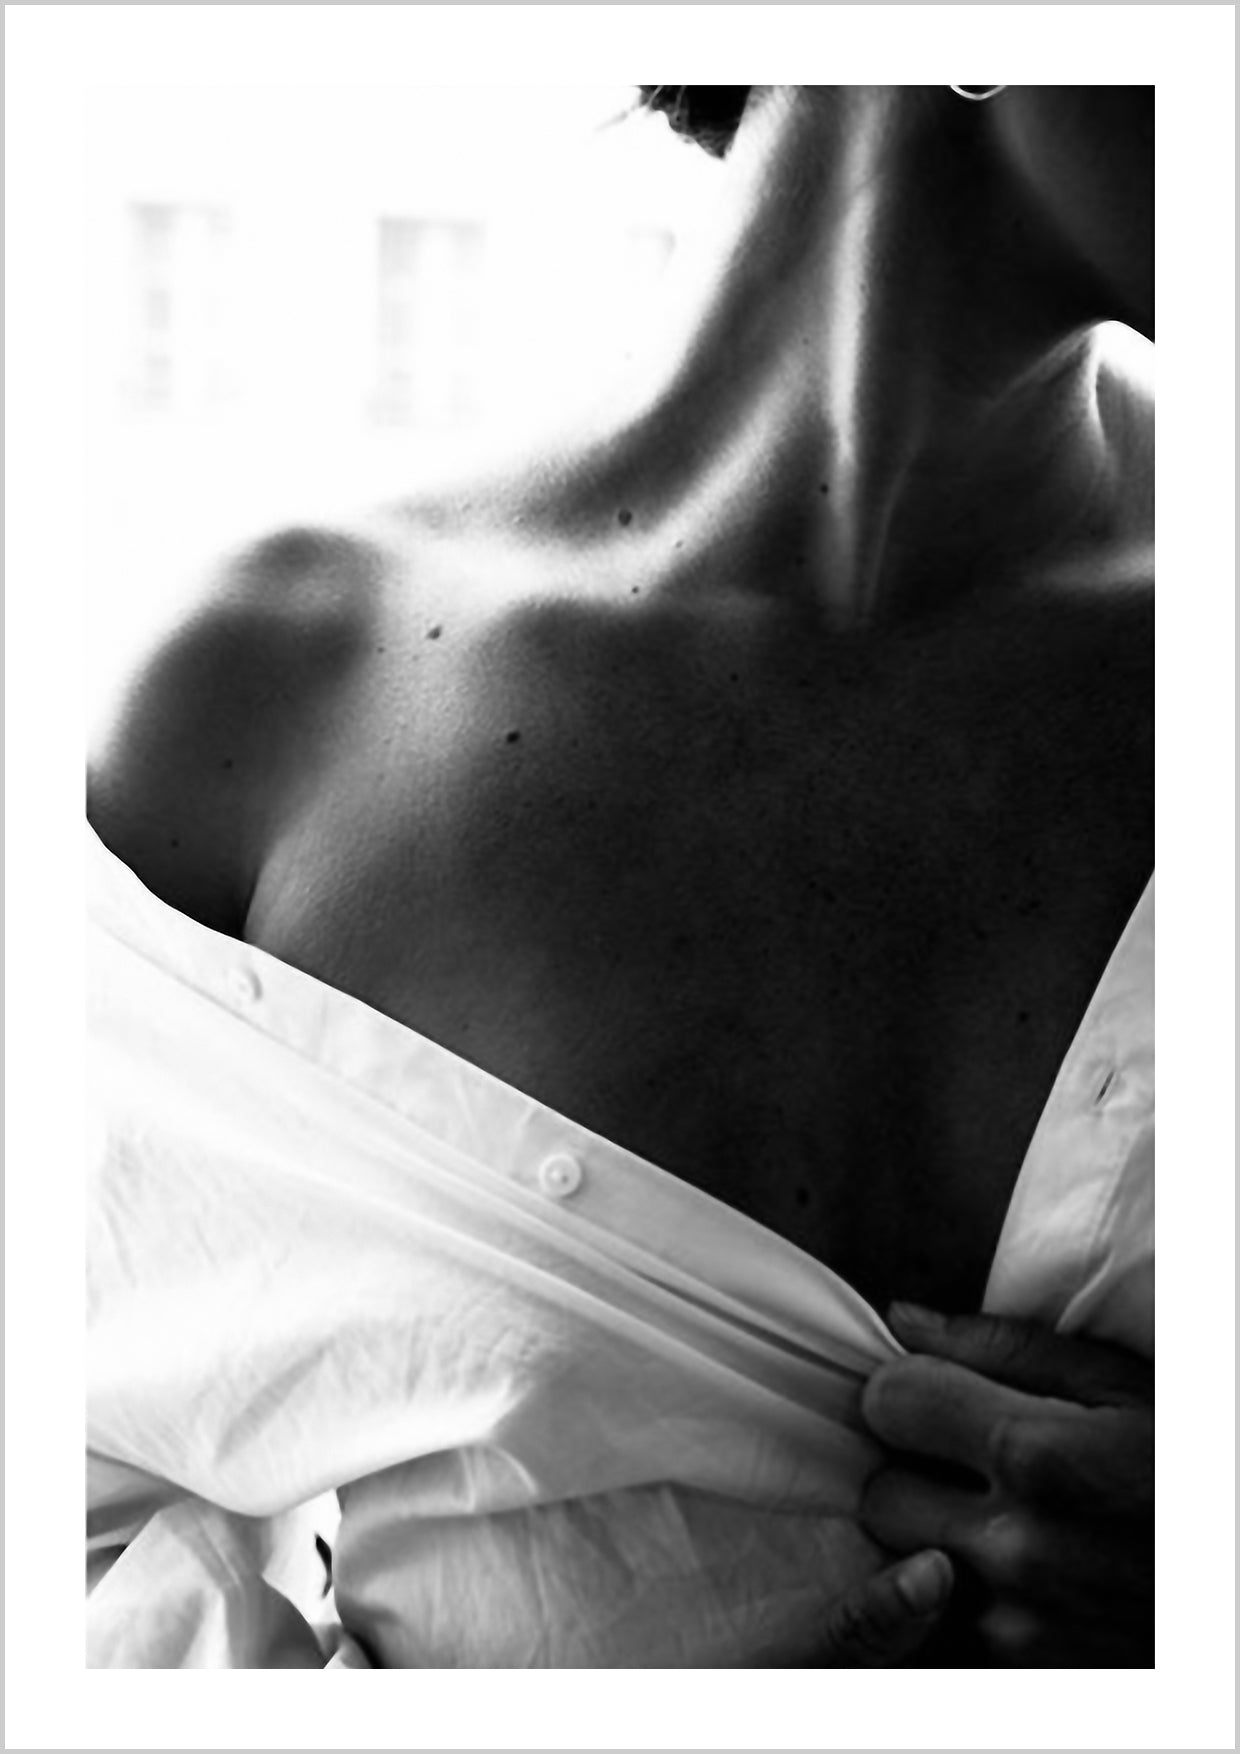 Photograph in black and white of a woman in a white shirt showing her shoulder. Sensual photo art is a style we love, and this Poster fits well with both other black and white photographs as well as botanical Posters.